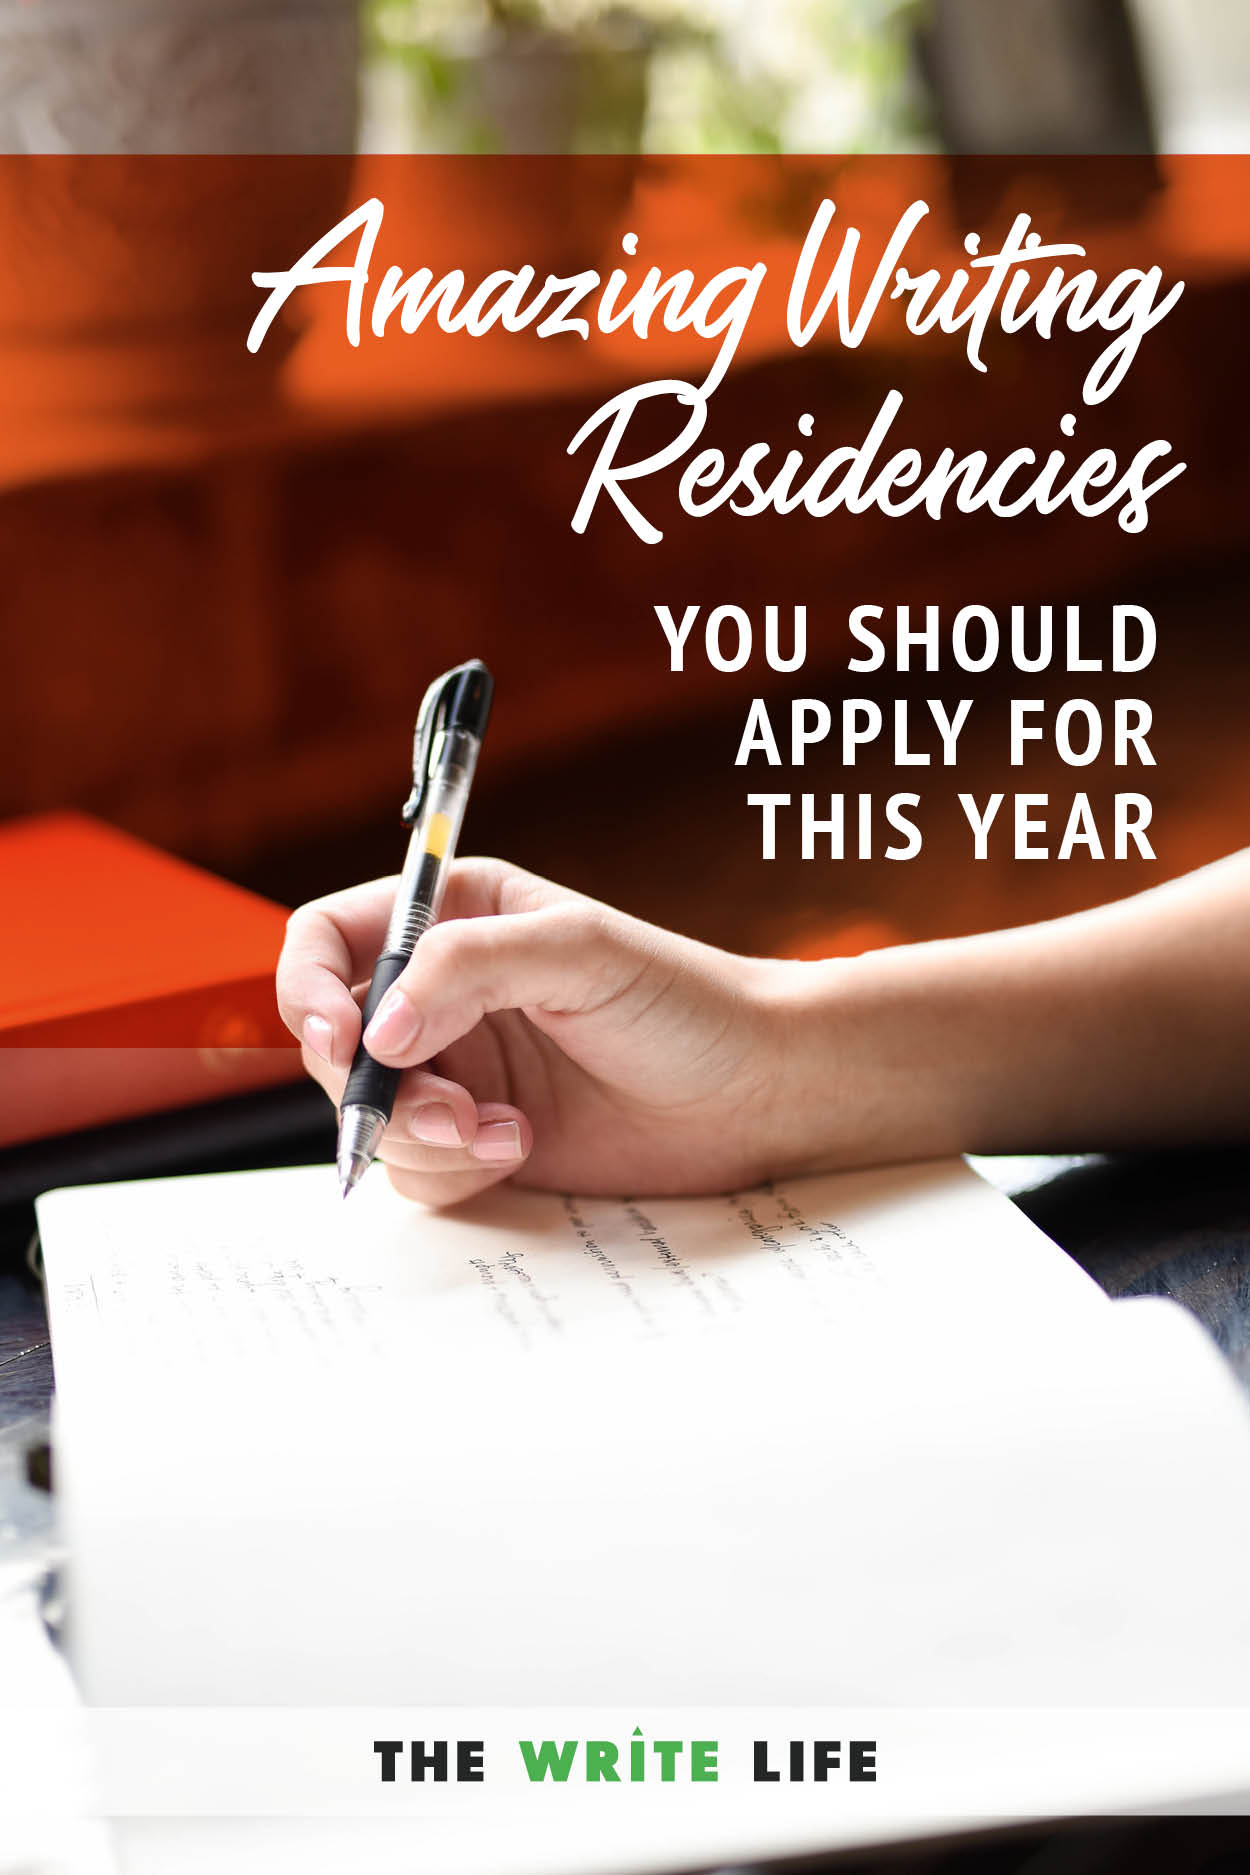 29 Amazing Writing Residencies You Should Apply For This Year Images, Photos, Reviews